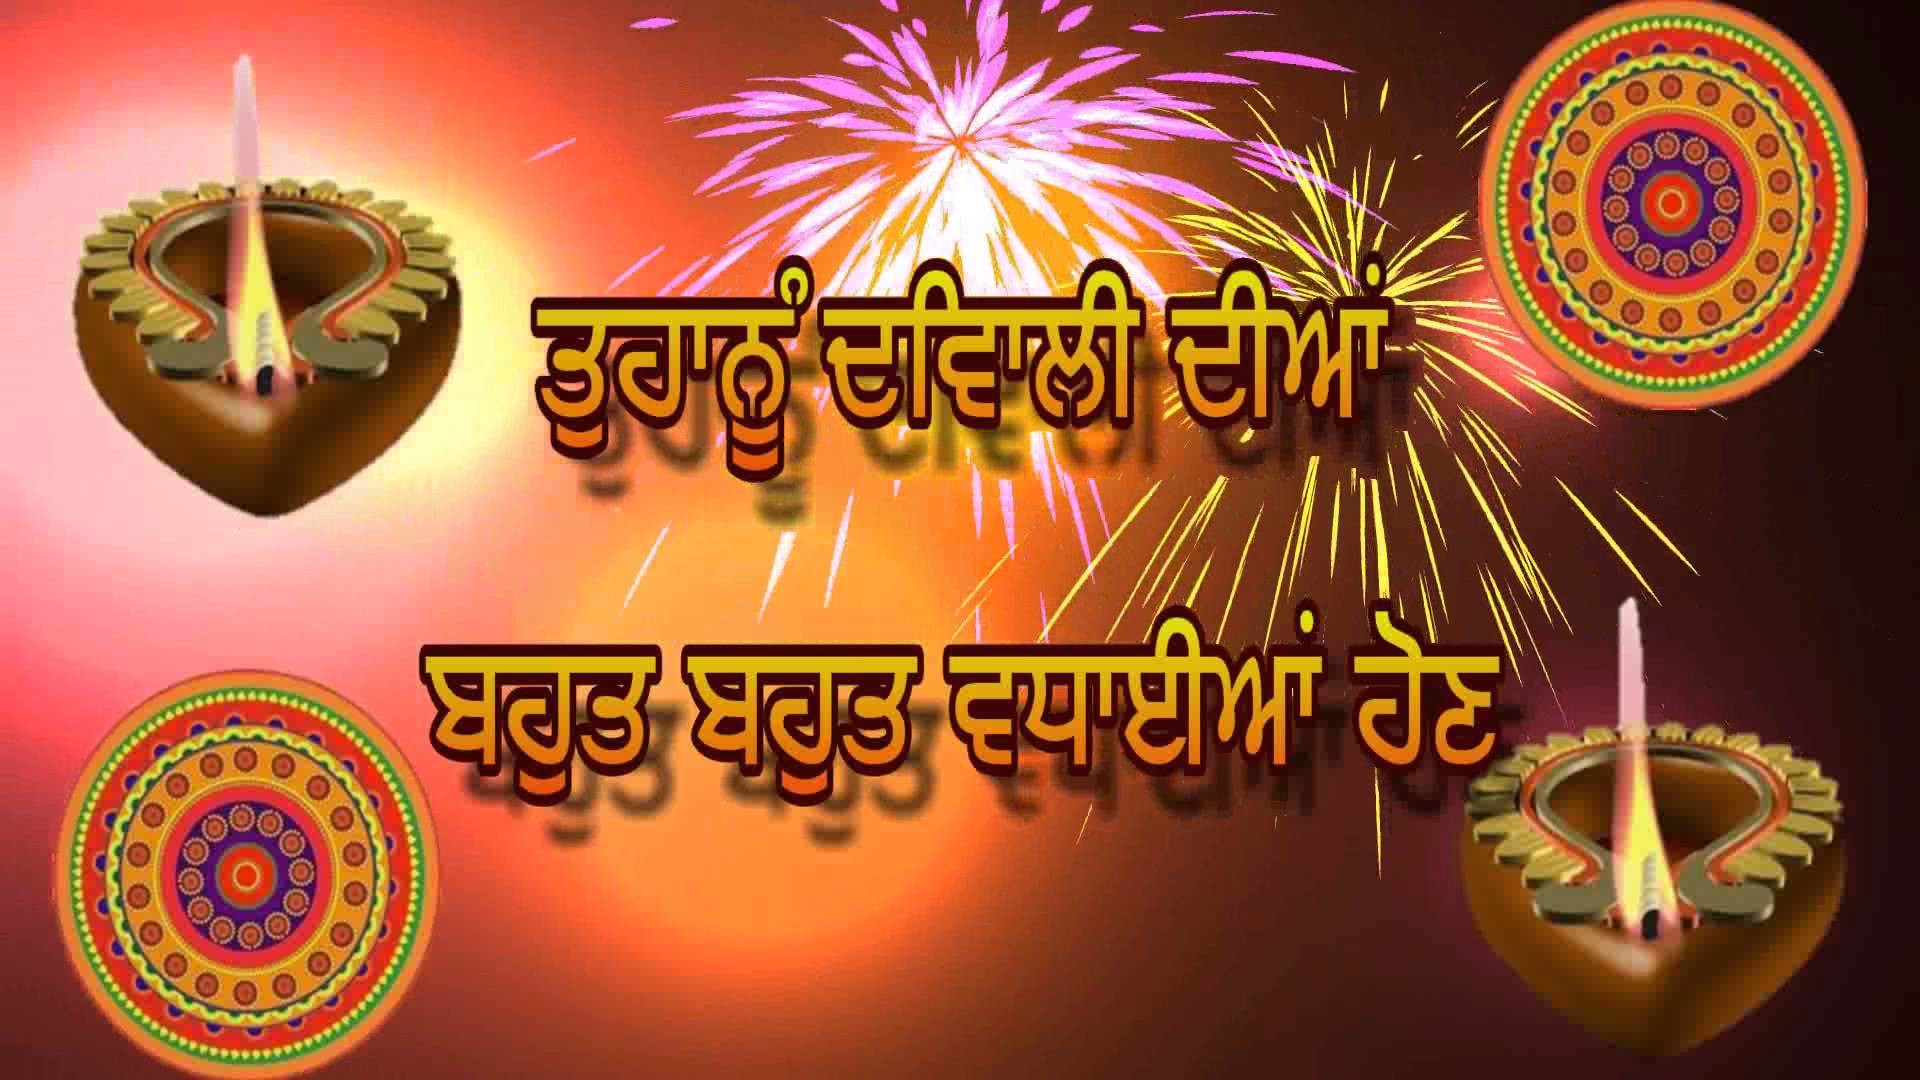 1920x1080 Shubh Diwali Video,Happy Diwali Punjabi,Wishes  ,Animation,Messages,Quotes,Whatsapp Video - YouTube